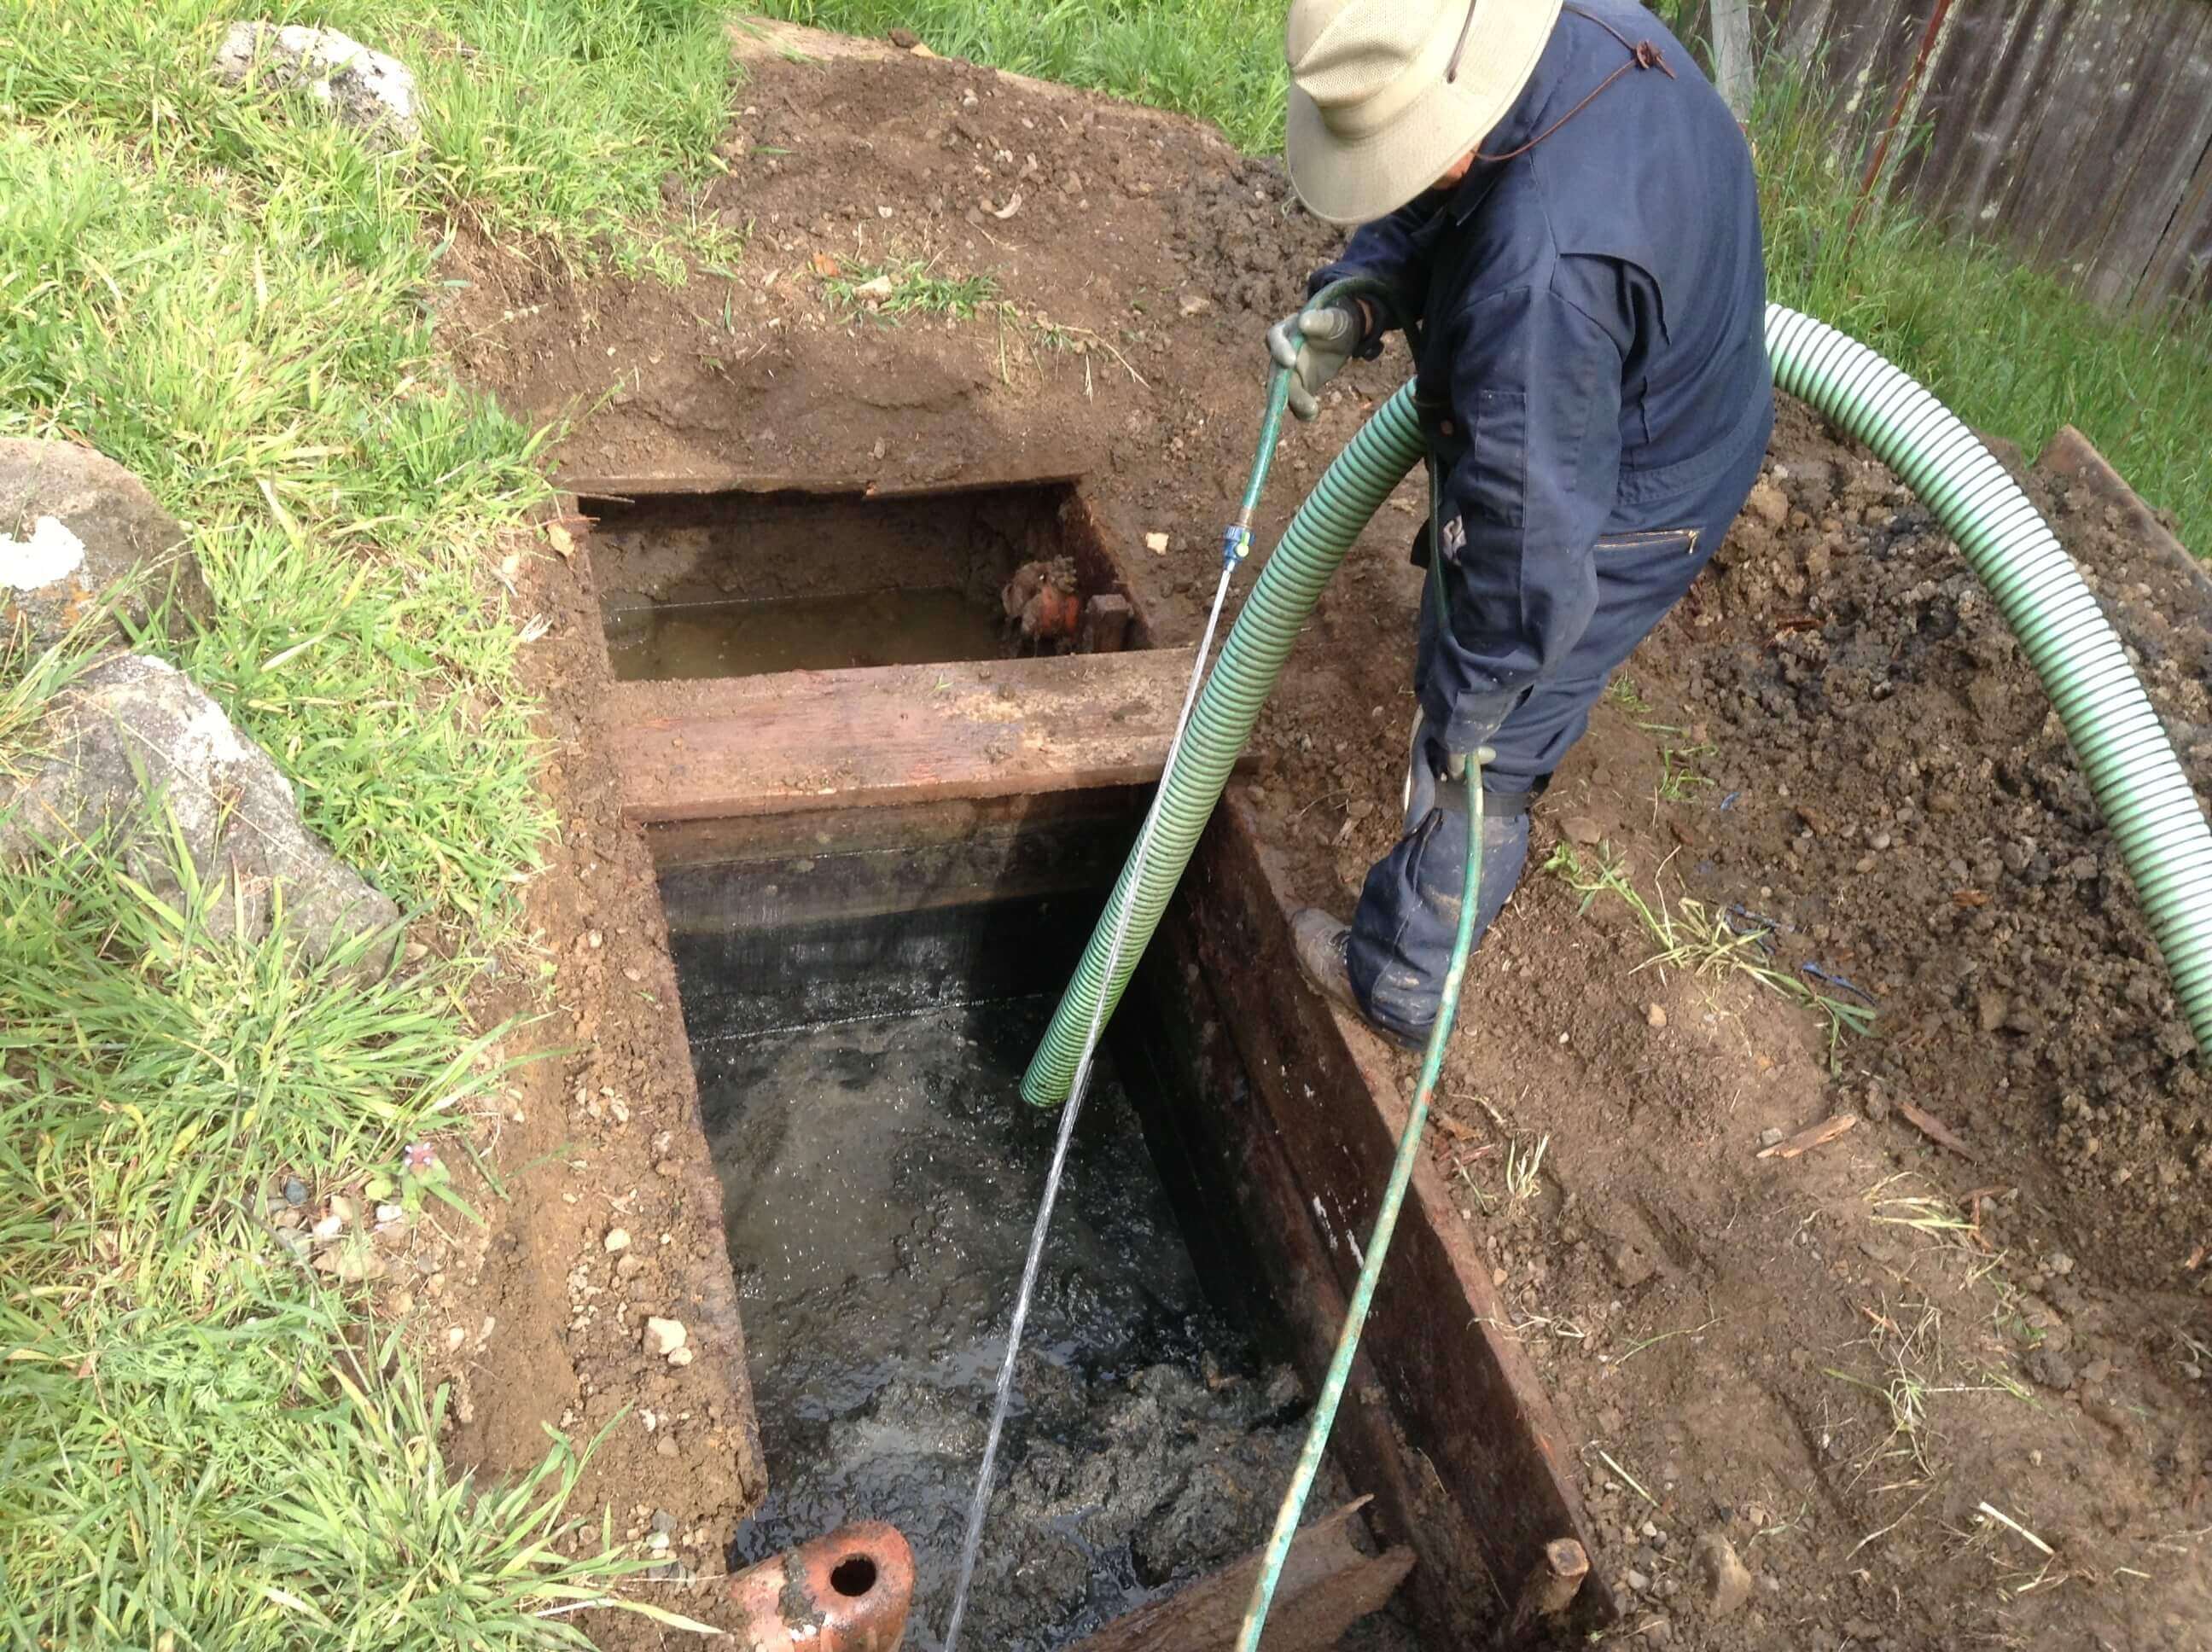 Septic Tank Cleaning-Palm Beach County’s Septic Tank Repair, Installation, & Pumping Service Experts-We offer Septic Service & Repairs, Septic Tank Installations, Septic Tank Cleaning, Commercial, Septic System, Drain Cleaning, Line Snaking, Portable Toilet, Grease Trap Pumping & Cleaning, Septic Tank Pumping, Sewage Pump, Sewer Line Repair, Septic Tank Replacement, Septic Maintenance, Sewer Line Replacement, Porta Potty Rentals